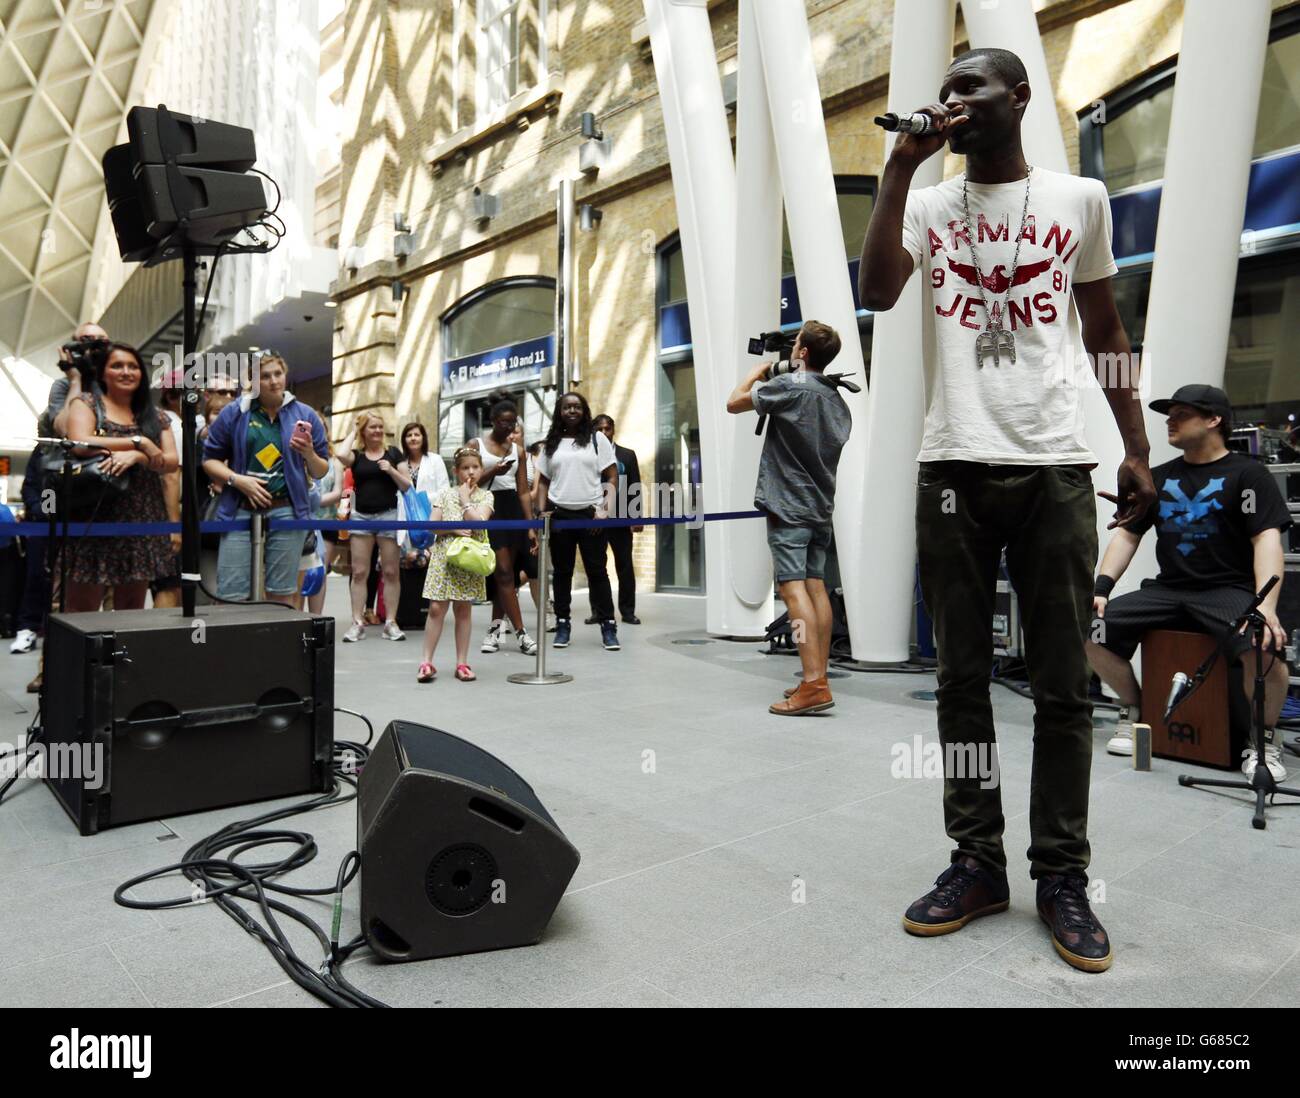 Wretch 32 performs at a surprise busking gig as part of a series of tours, all part of Yahoo! on the Road, a prelude top the Yahoo! Wireless festival at King's Cross railway station, London. Stock Photo